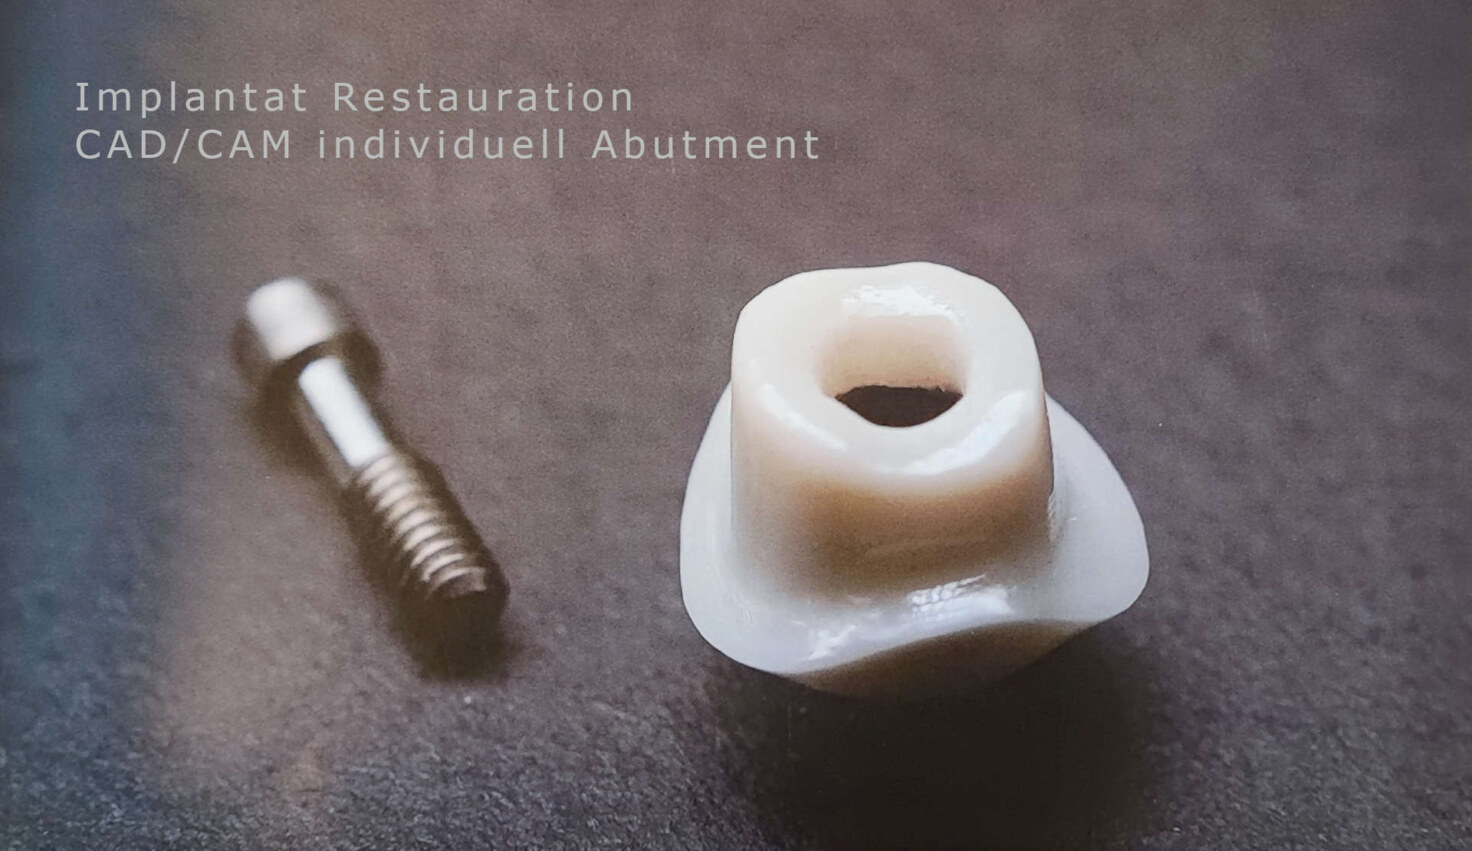 individuell abutment